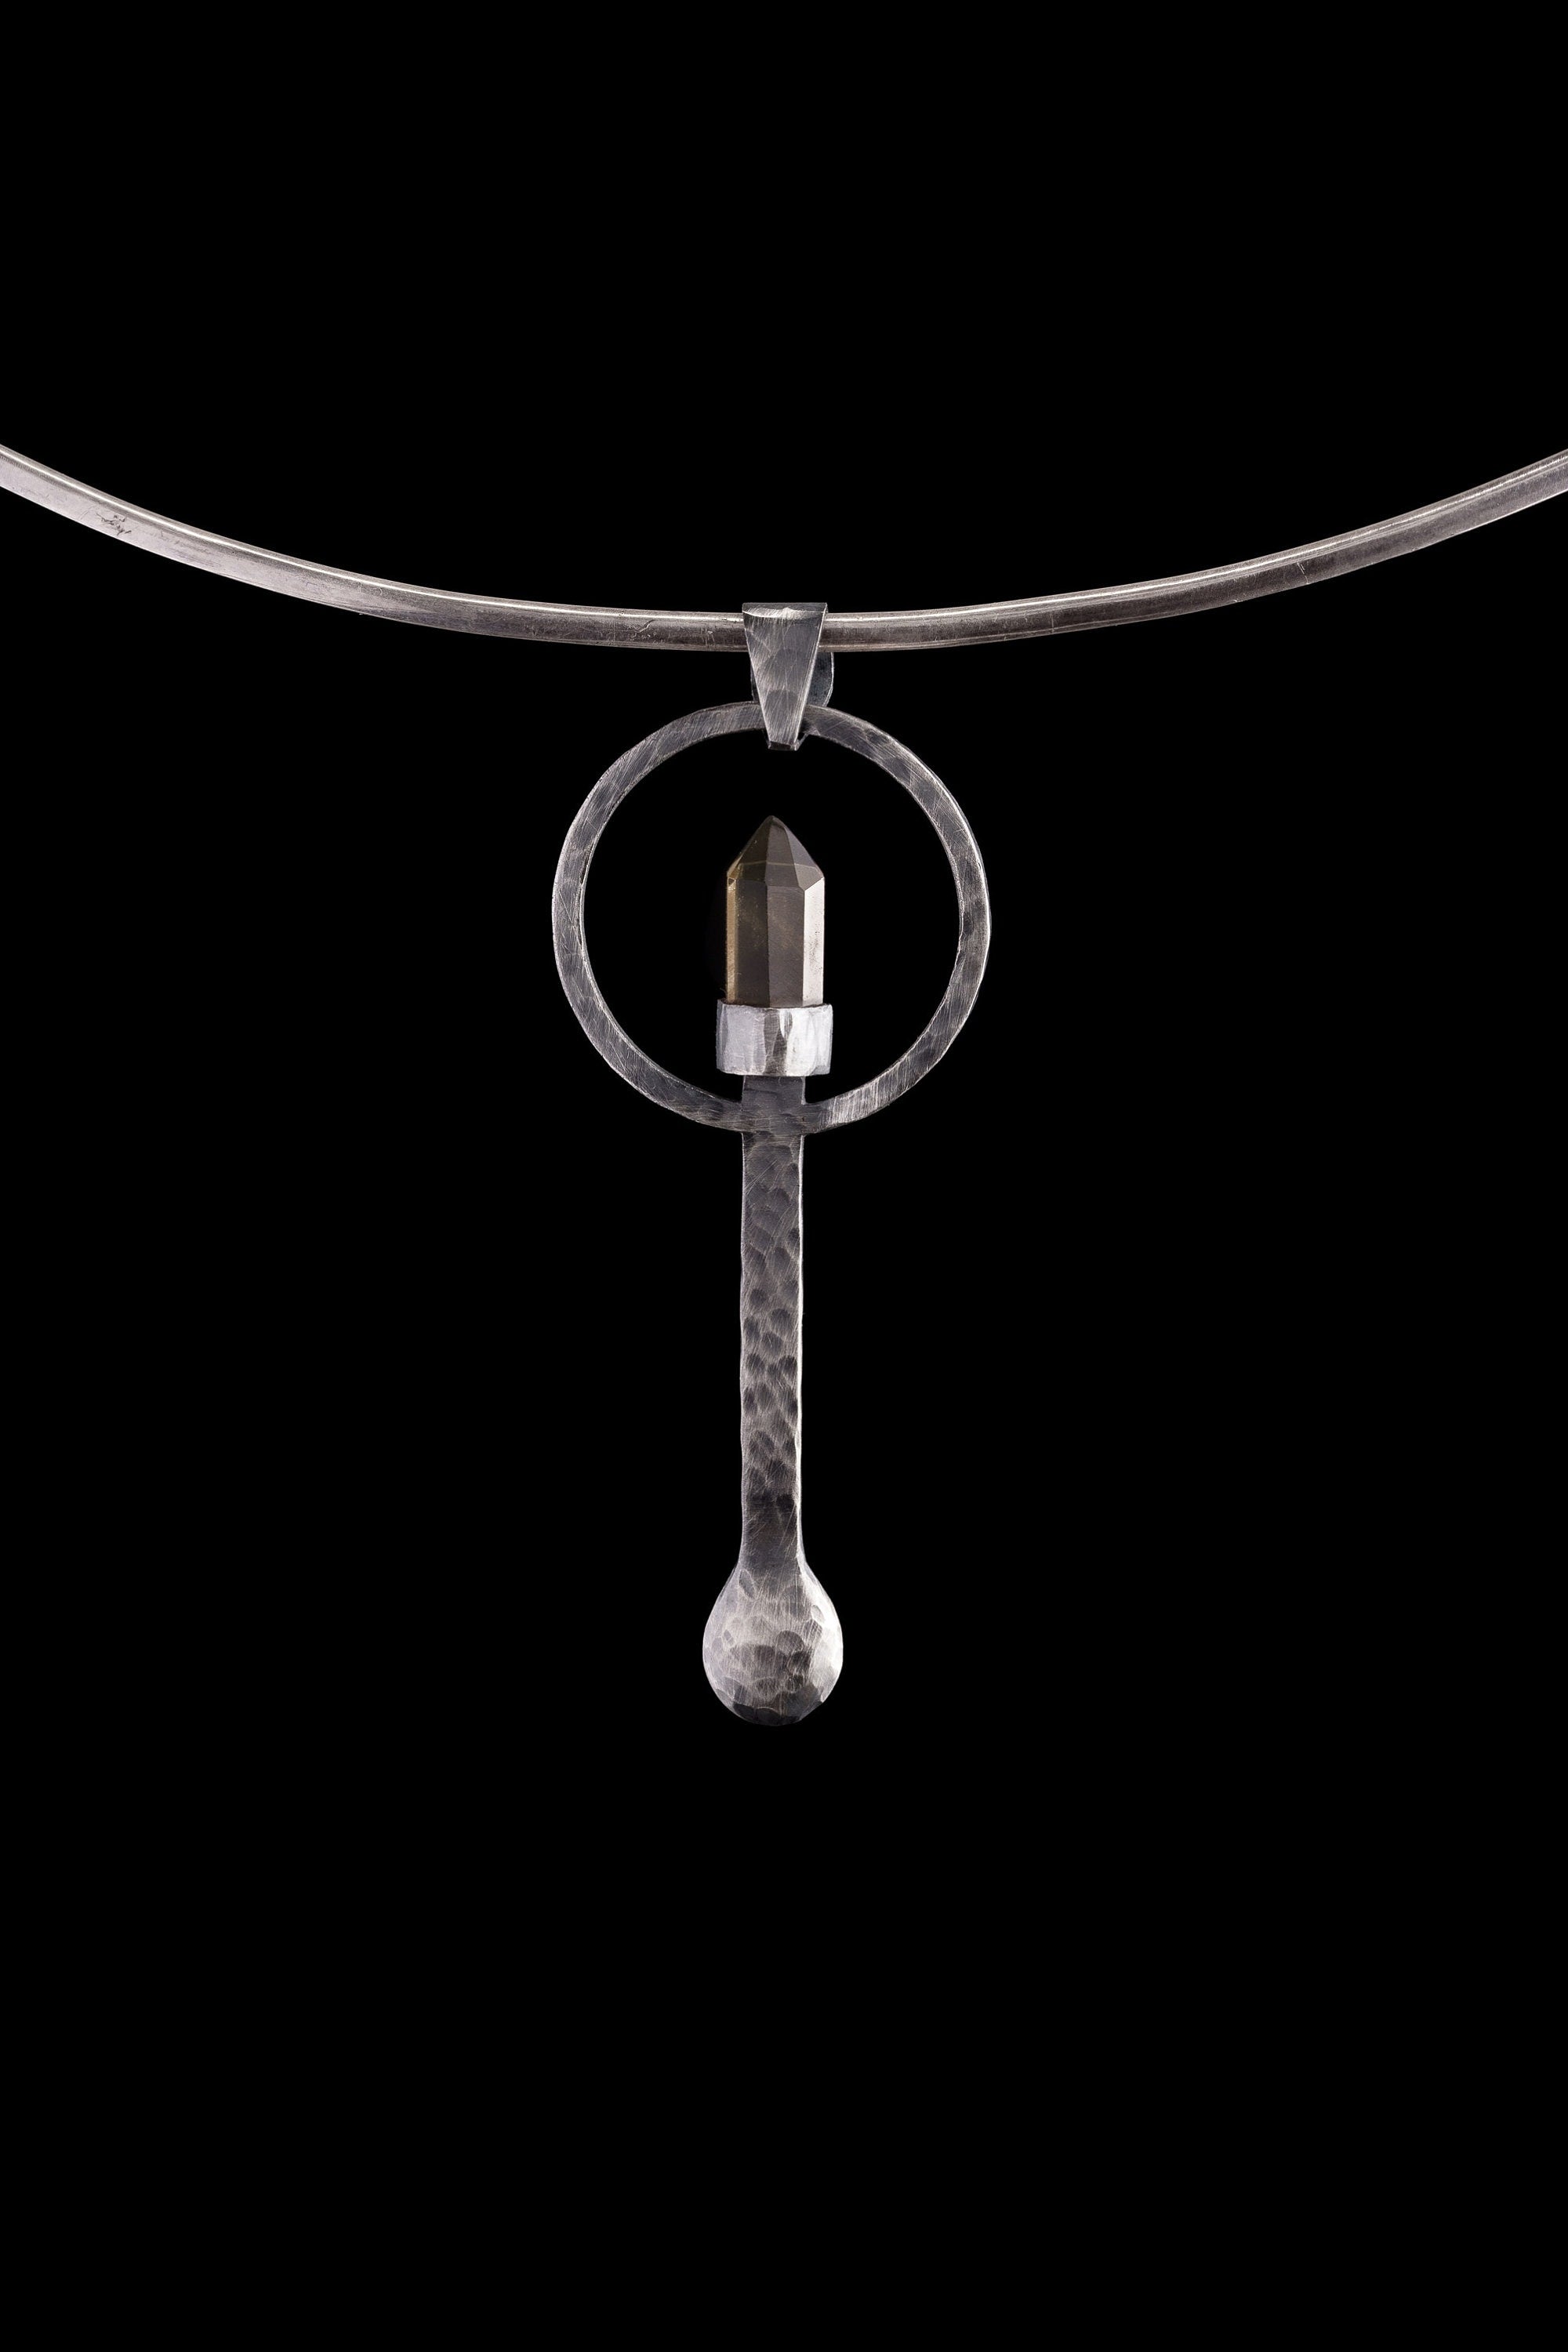 Cut Citrine Generator - Spice / Ceremonial Spoon - 925 Cast Silver - Oxidised Hammer Textured - Crystal Pendant Necklace